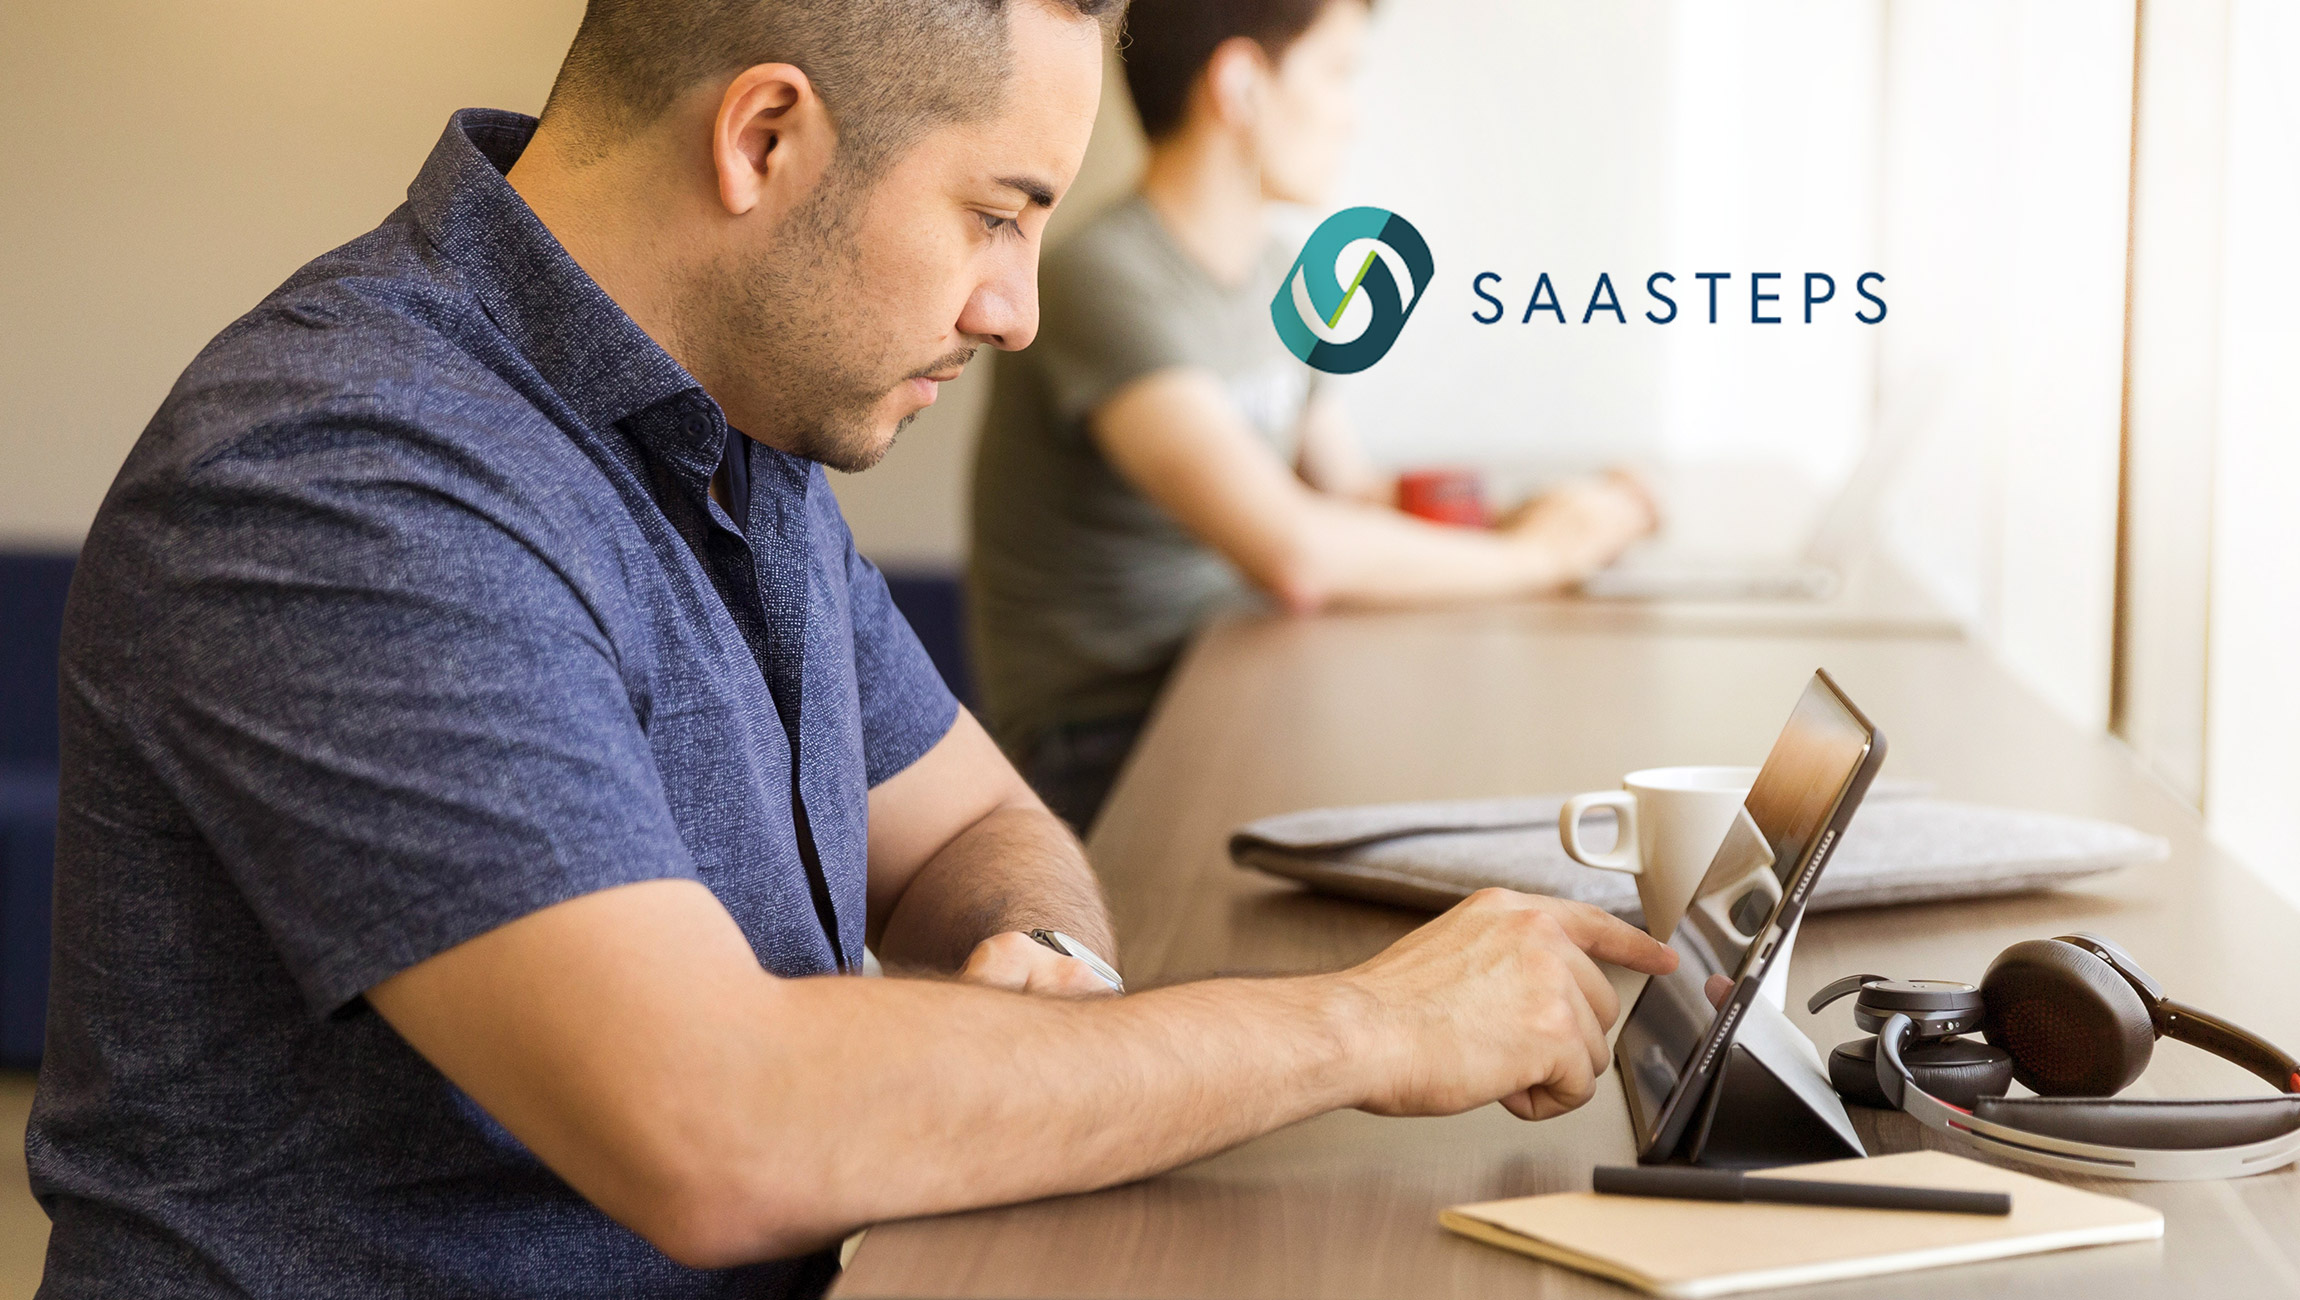 Gavin Gomes, former Sr. Executive of TELSTRA, AUSPOST, CANNON, & FUJIFILM, Startup Entrepreneur, & Business Process Expert Teams Up With Global Software Company SAASTEPS